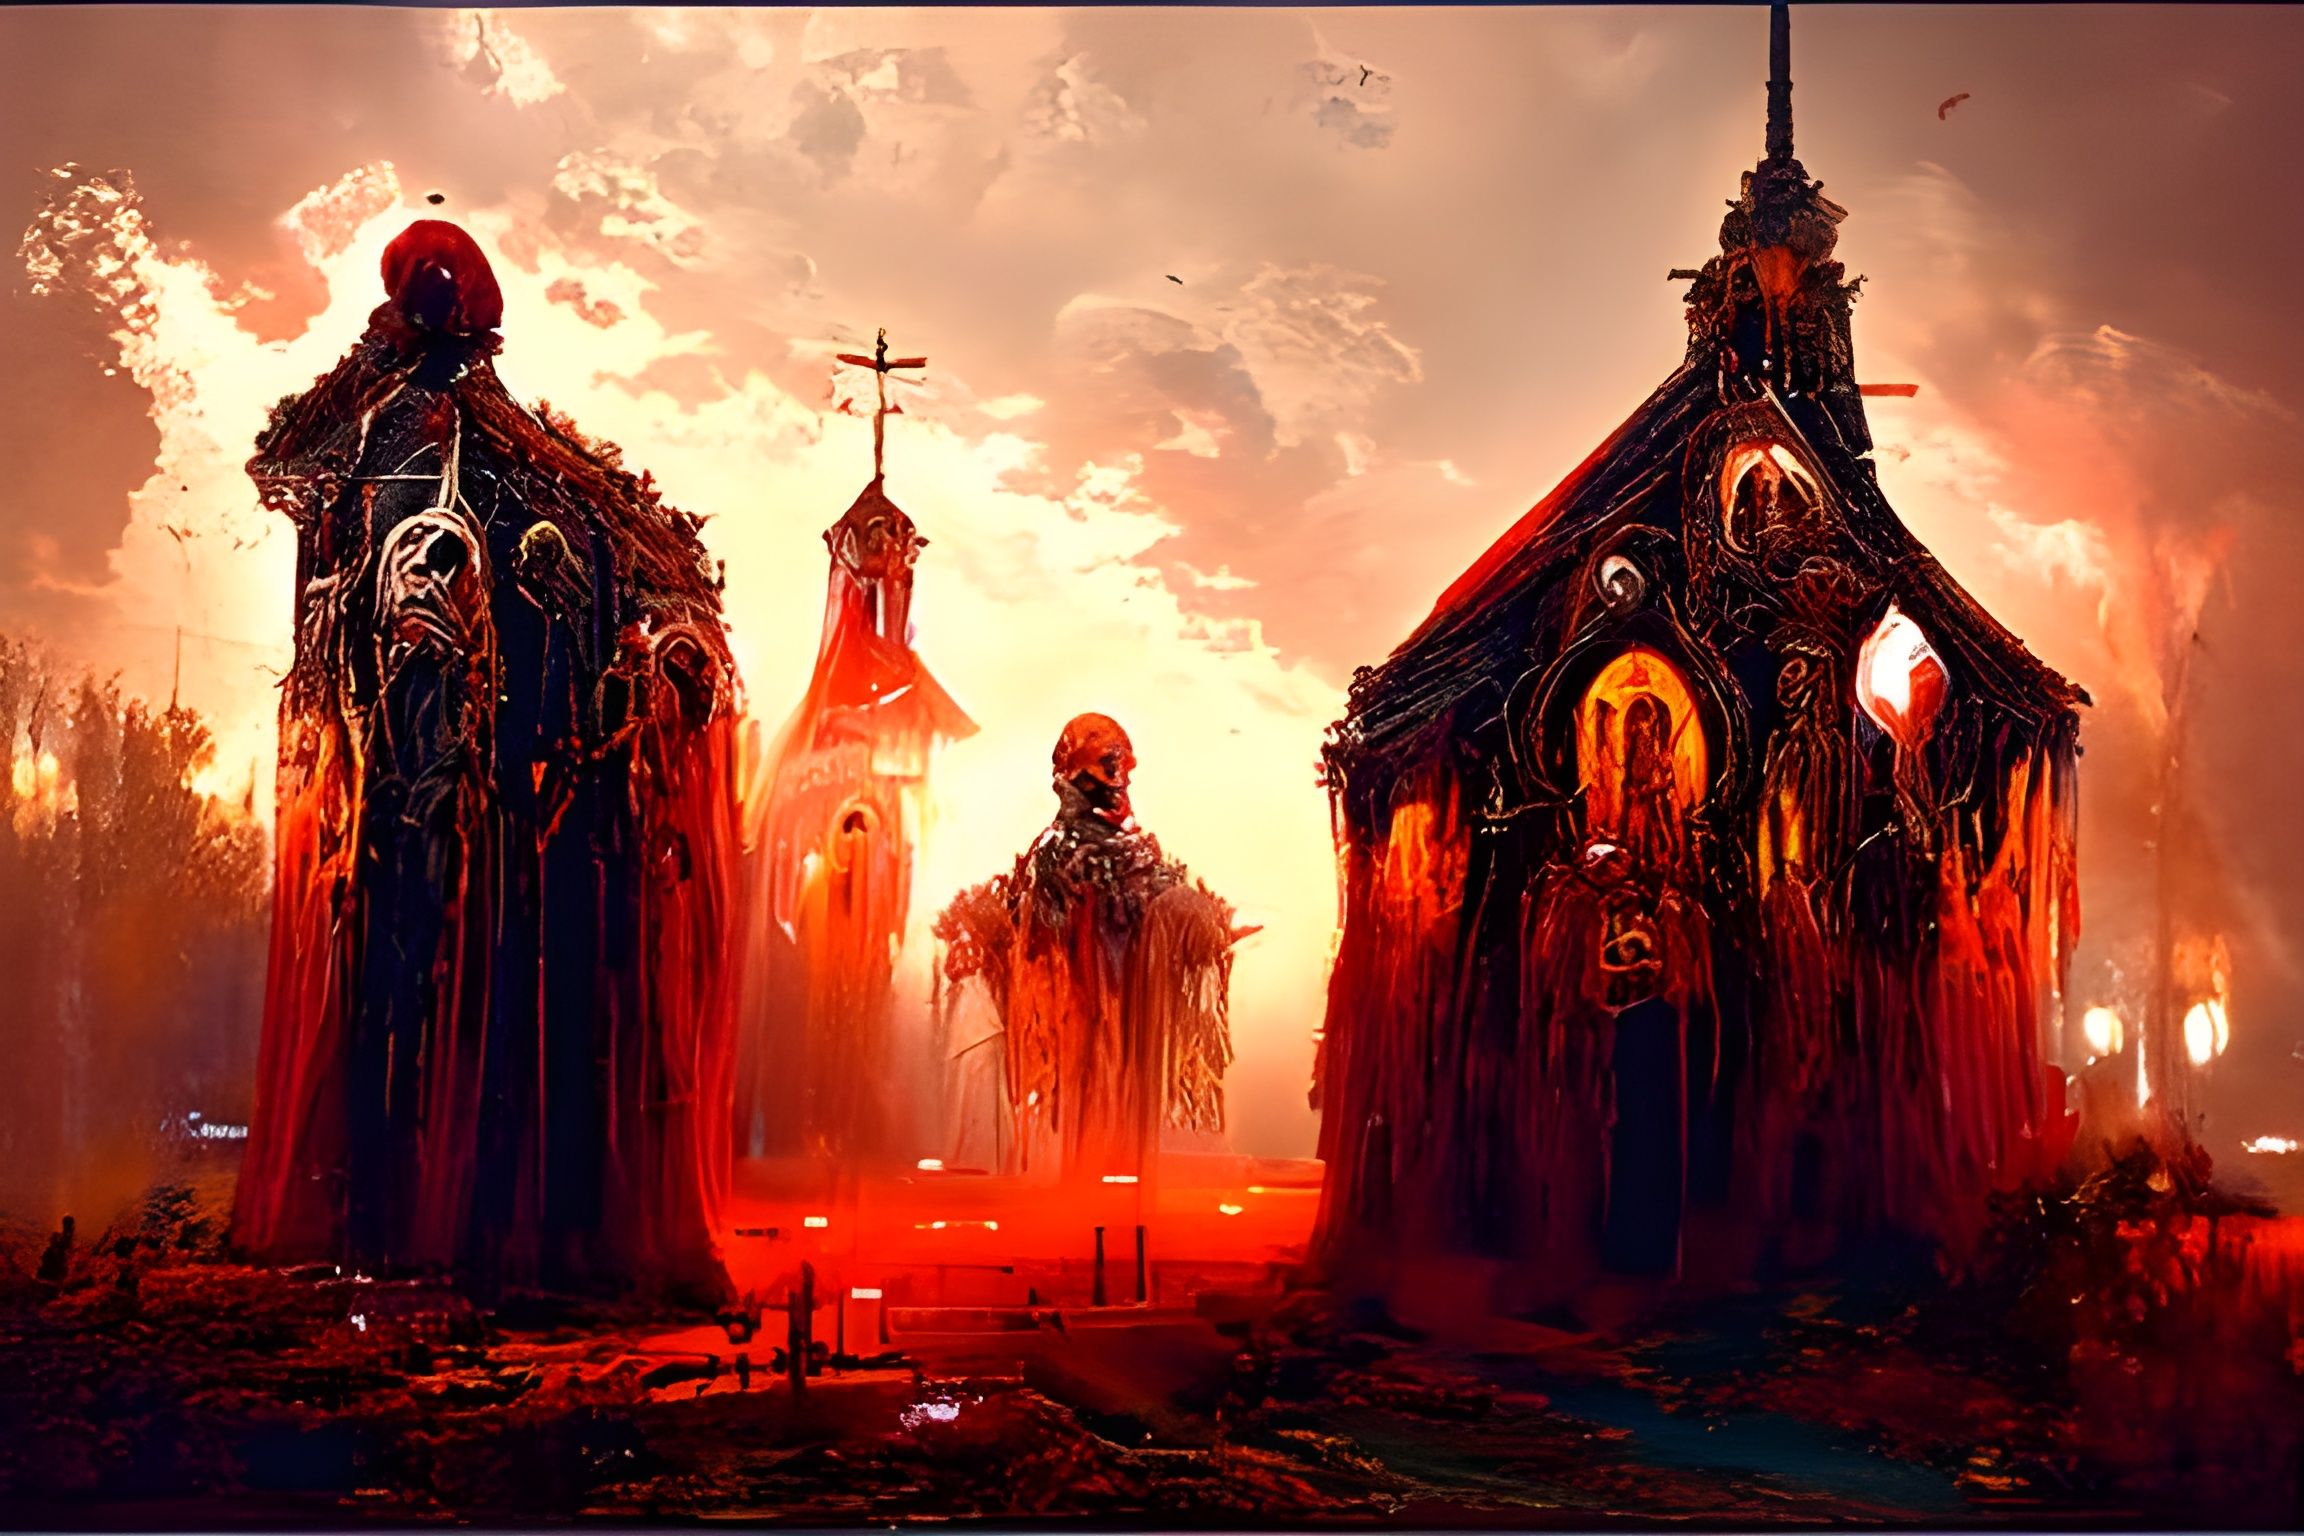 Church of the Broken God from SCP Foundation Universe - AI Generated  Artwork - NightCafe Creator